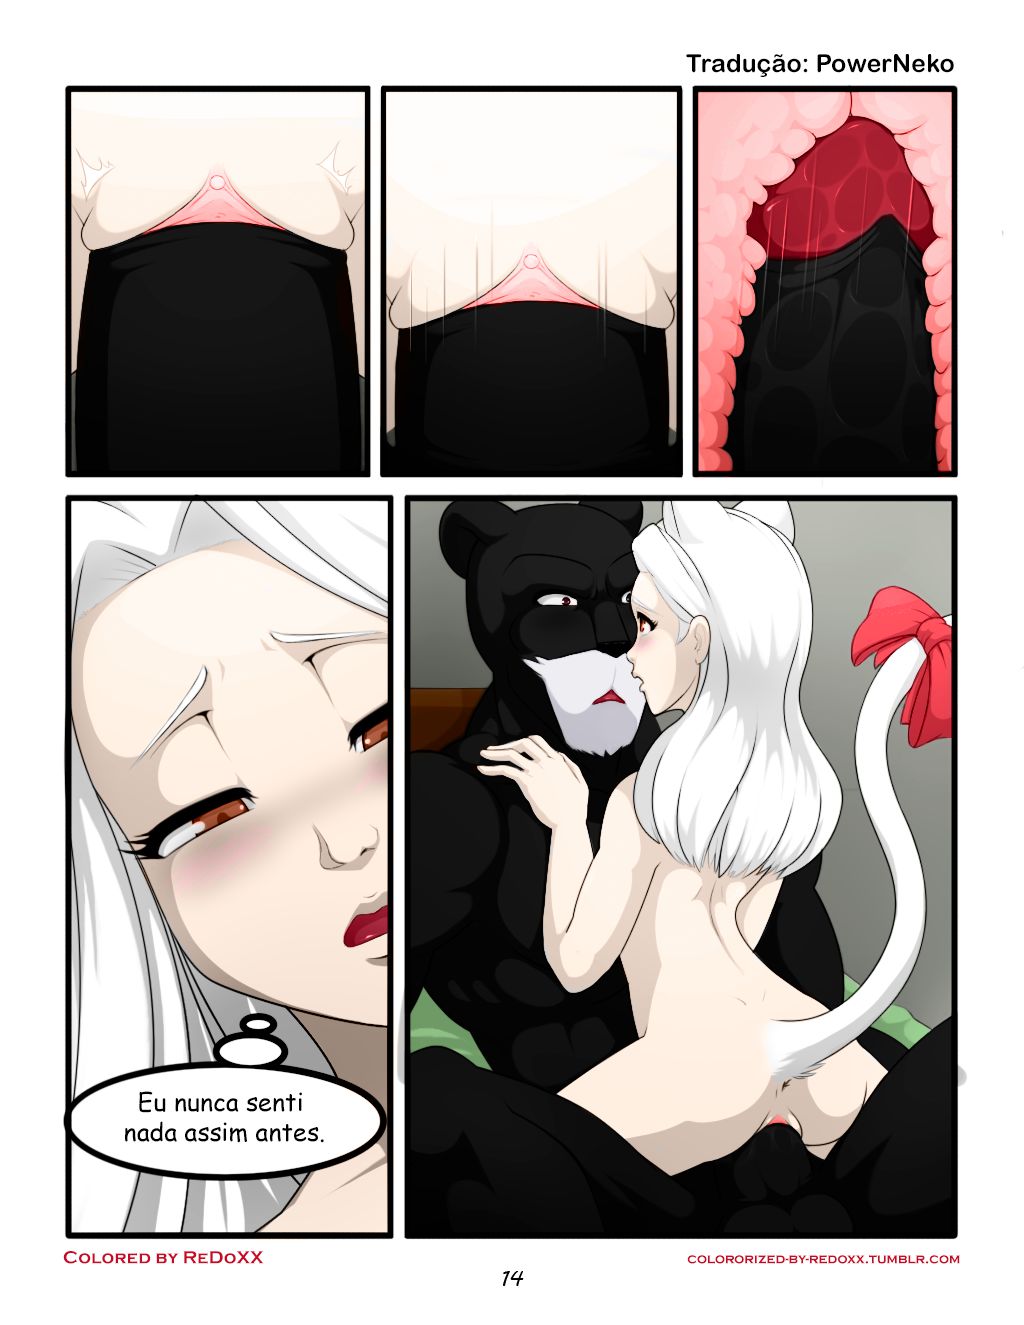 [Darkmirage]Size Counts (O Tamanho Importa) [Colorized by ReDoXX] [Portuguese-BR] [Translated by PowerNeko] 15